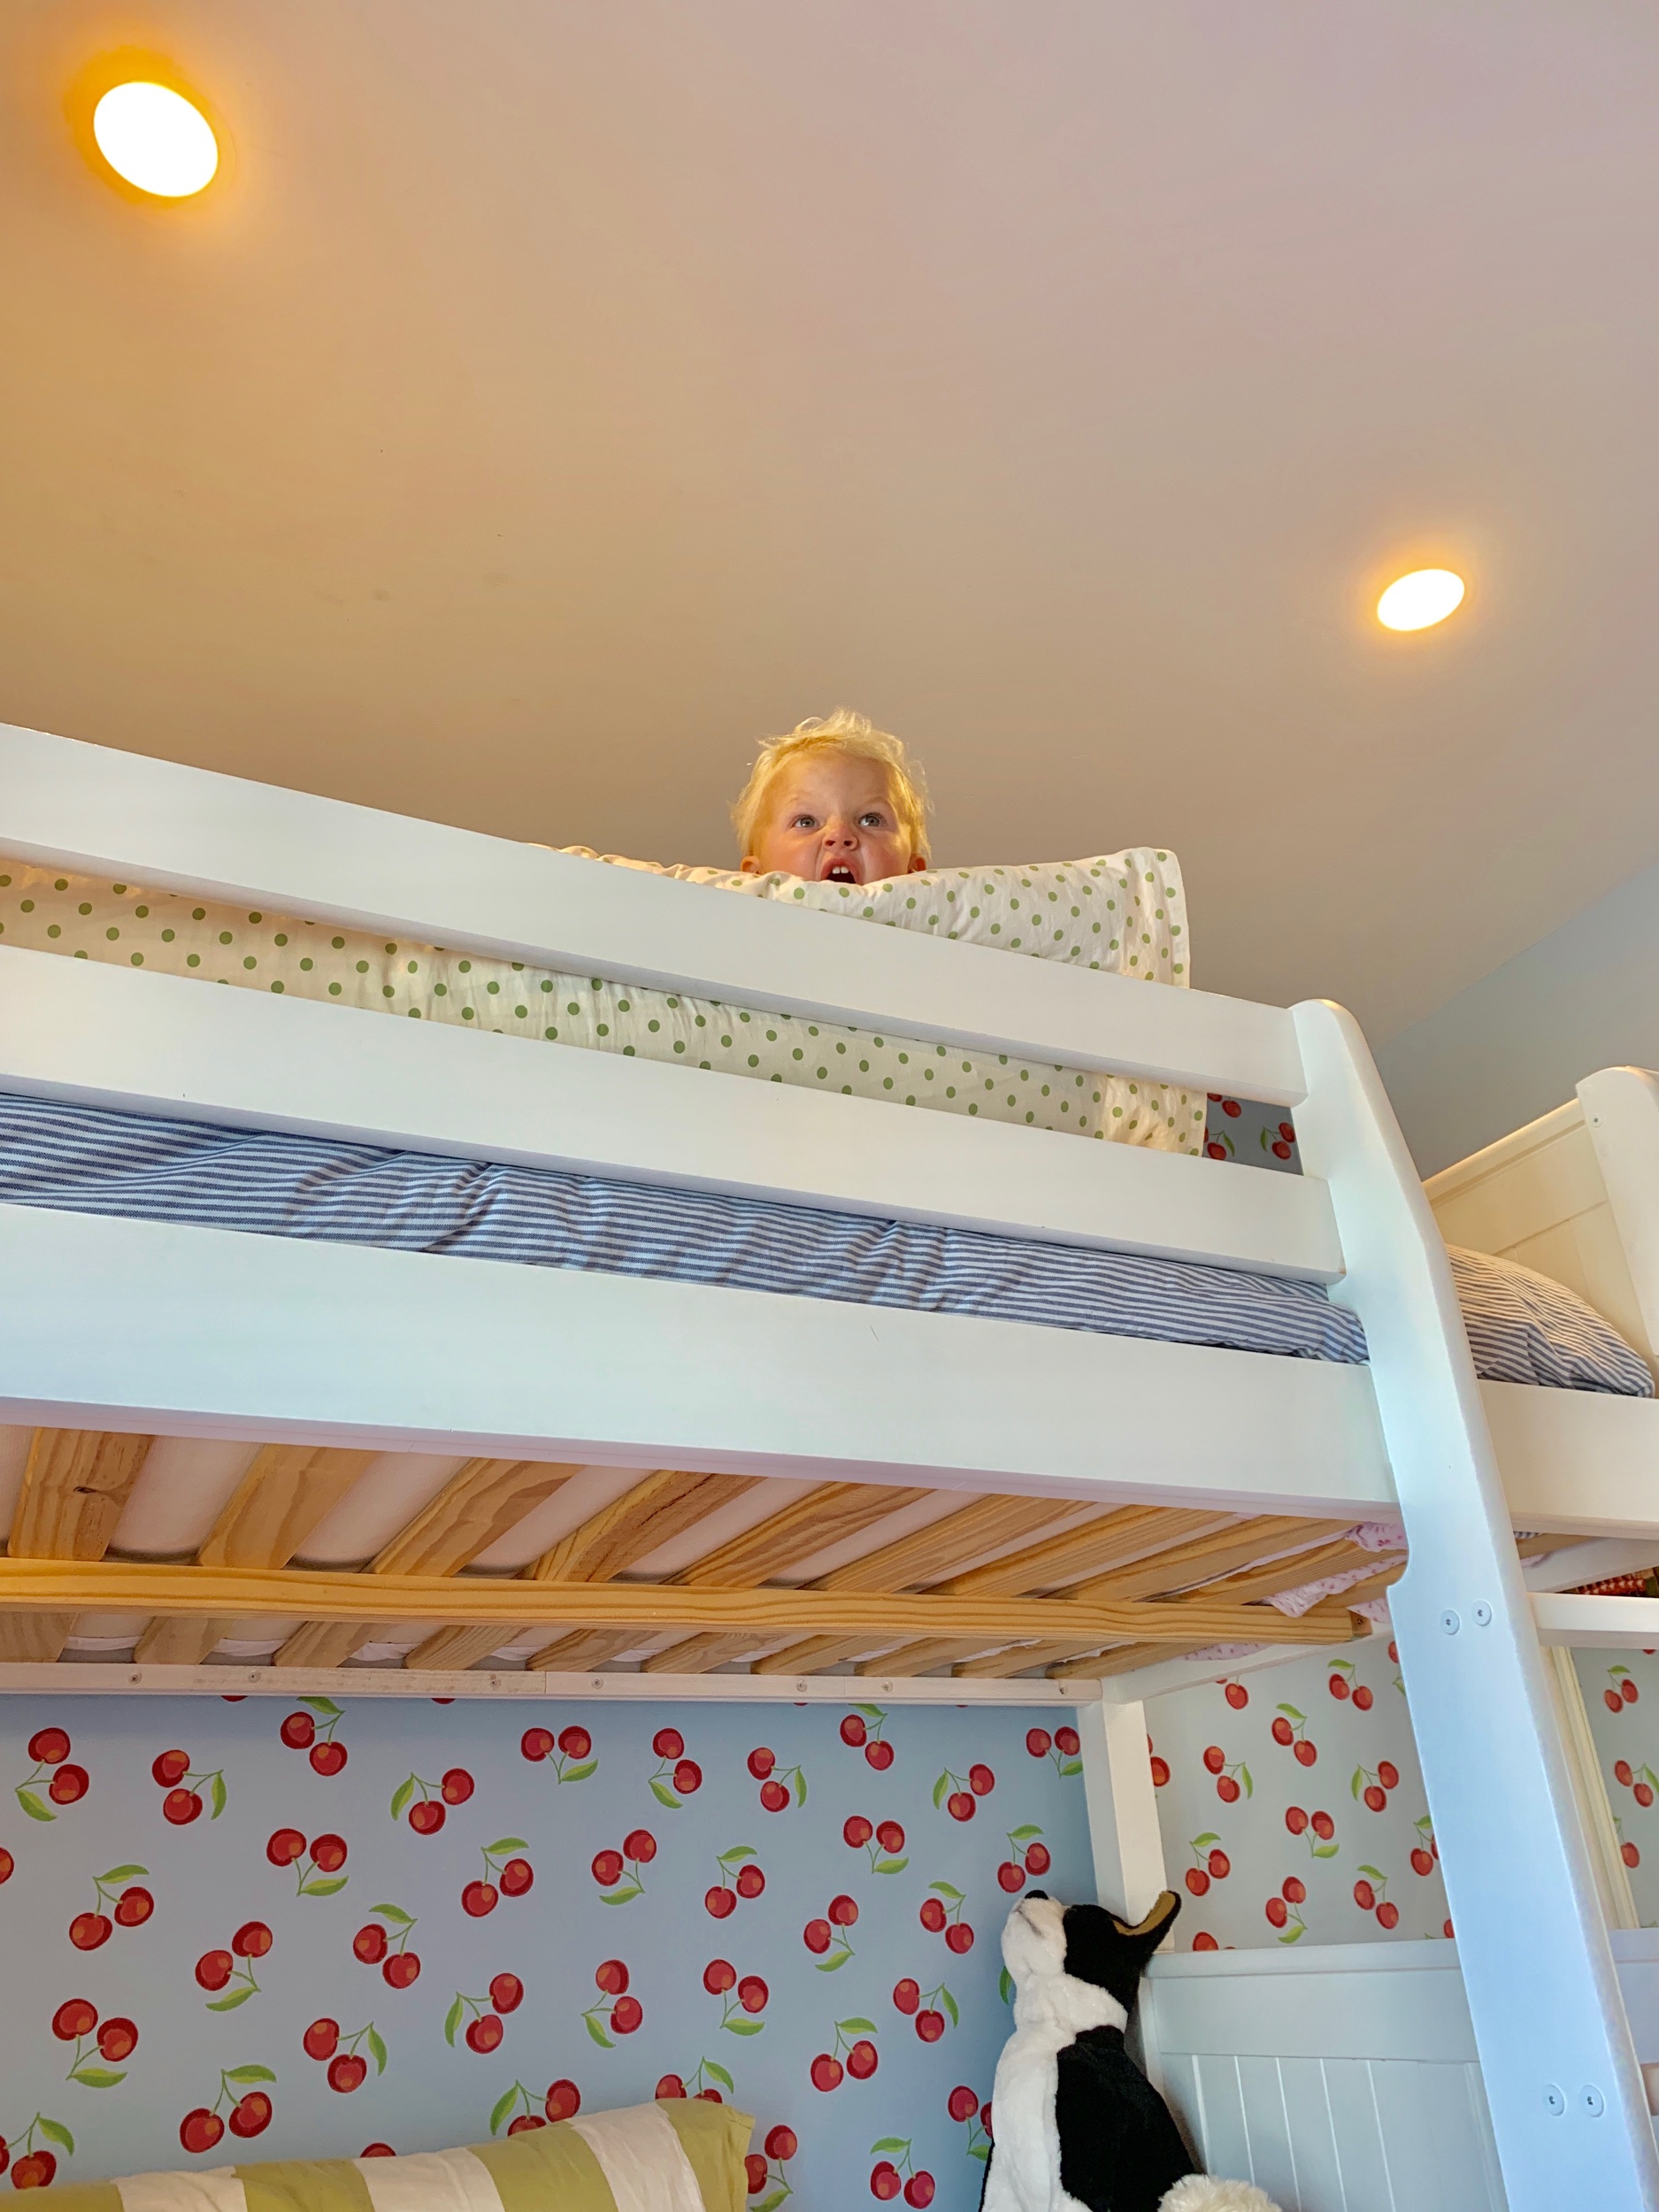 Bunk Beds Problems And Solutions, Battery Operated Bunk Bed Lights